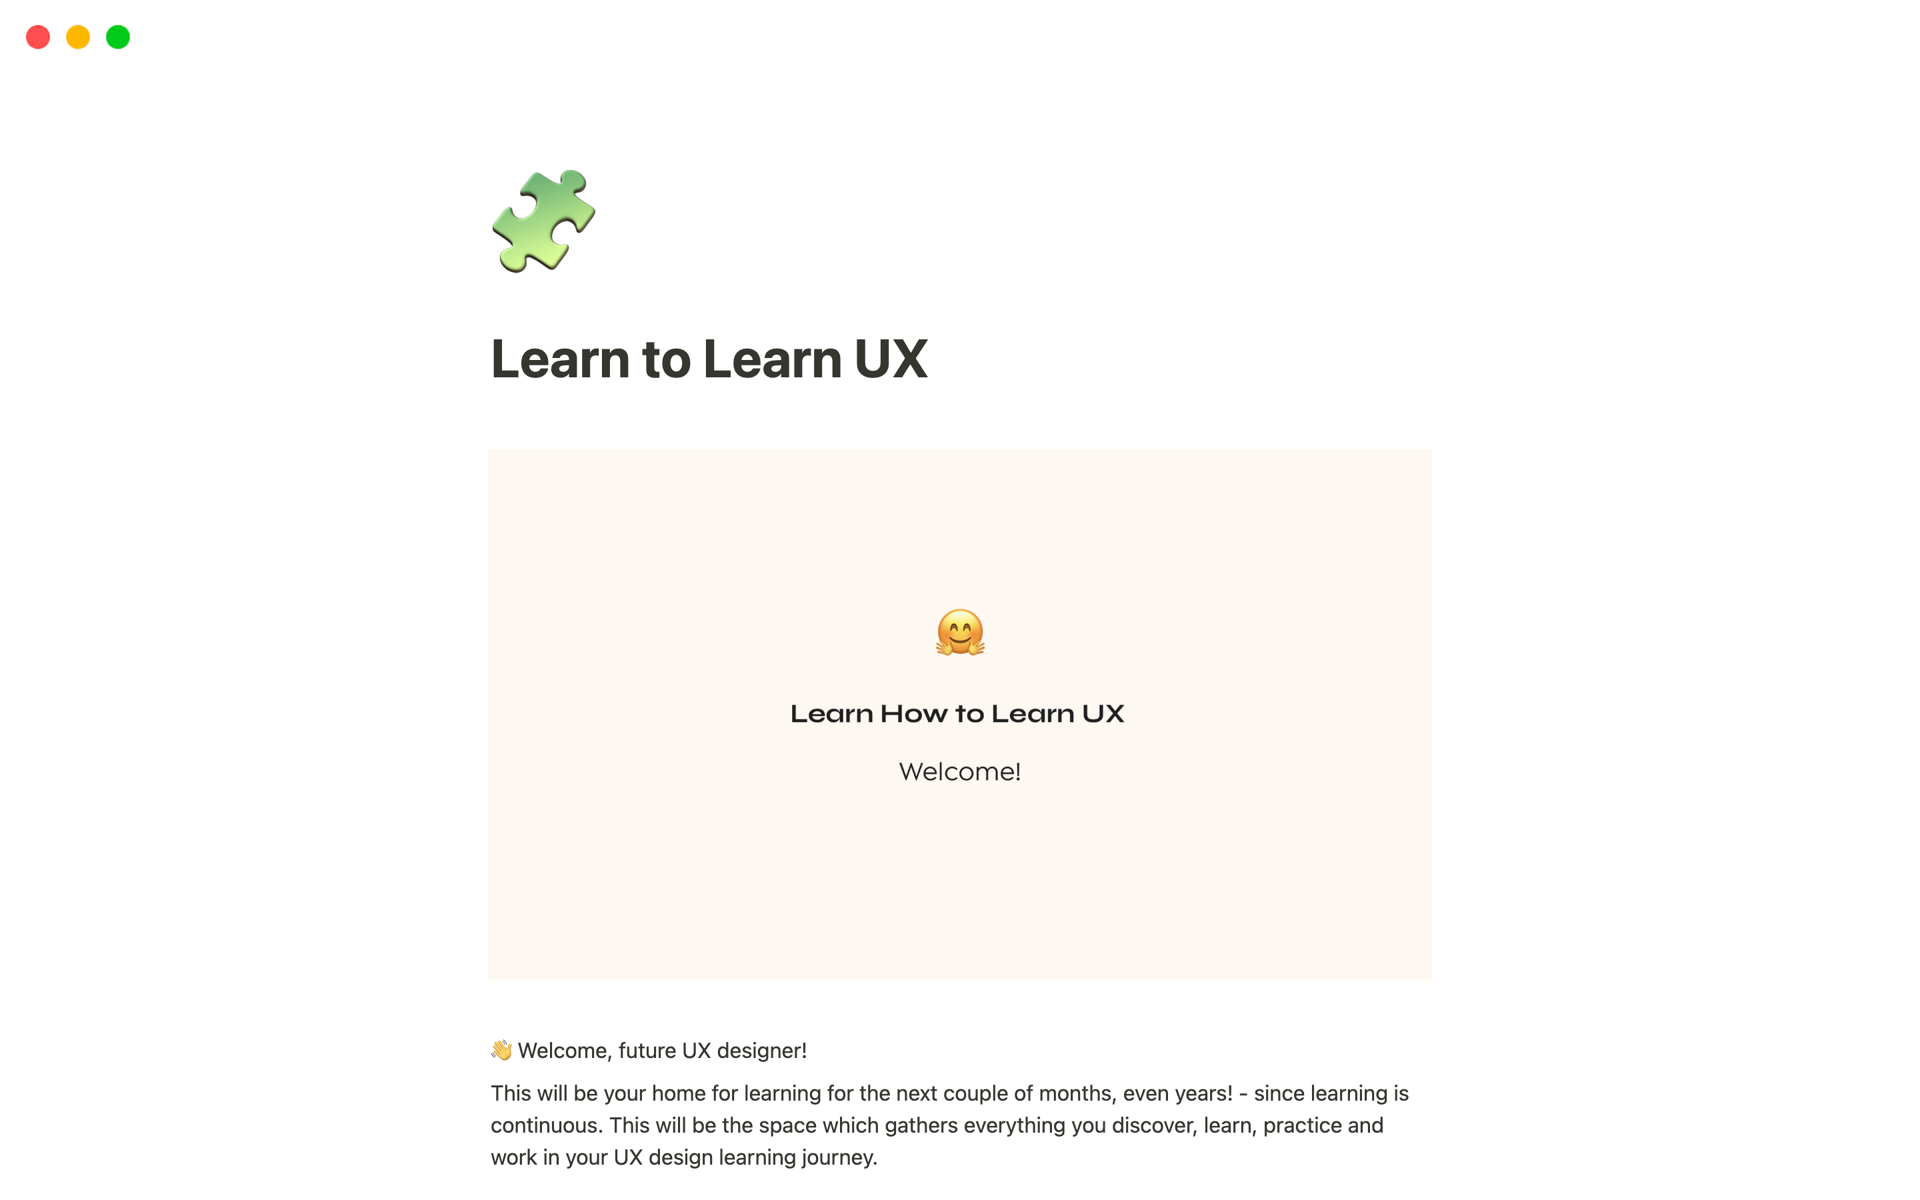 This is a robust structure for starting and documenting your UX learning journey.